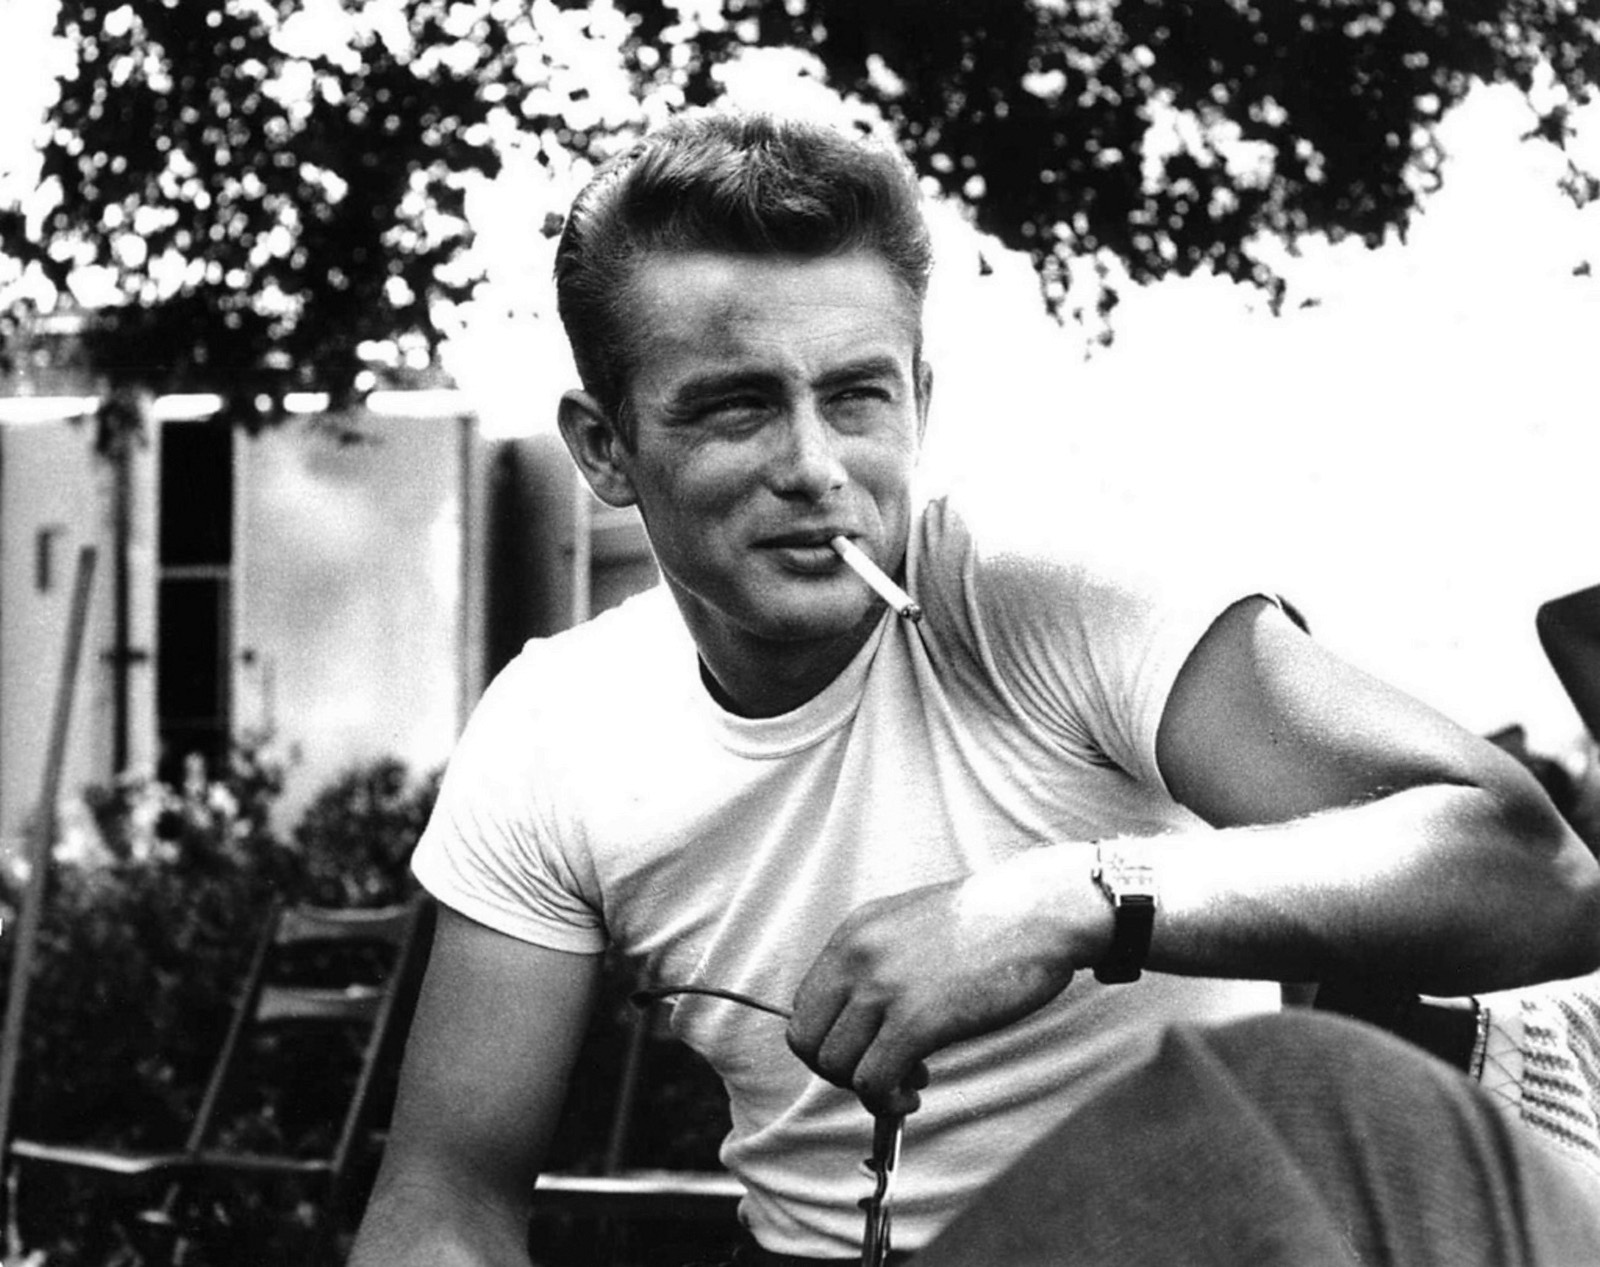 James-Dean-White-T-Shirt-Rebel-Without-a-Cause